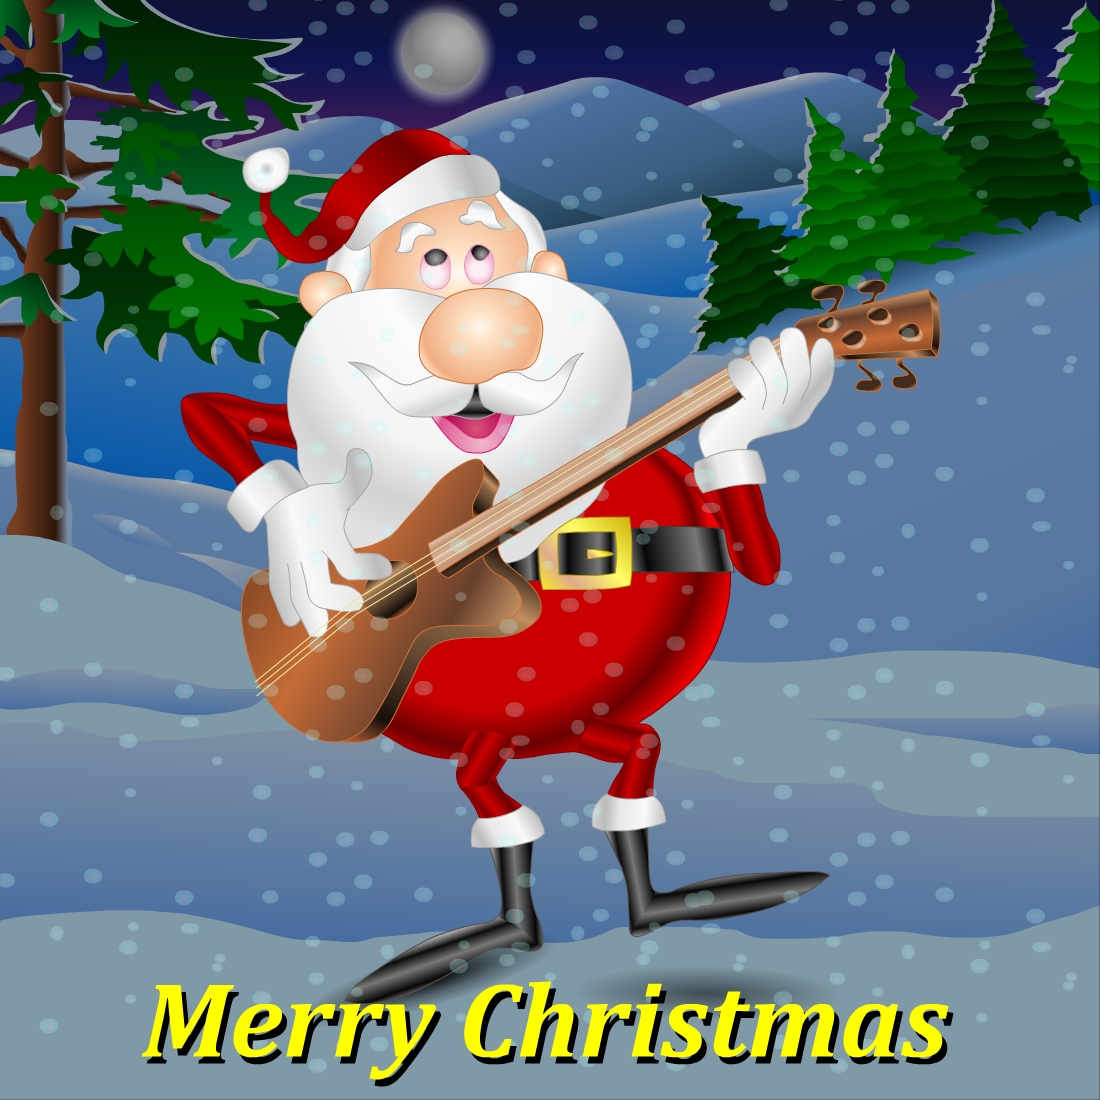 Merry Christmas Santa Singing Illustrations preview image.